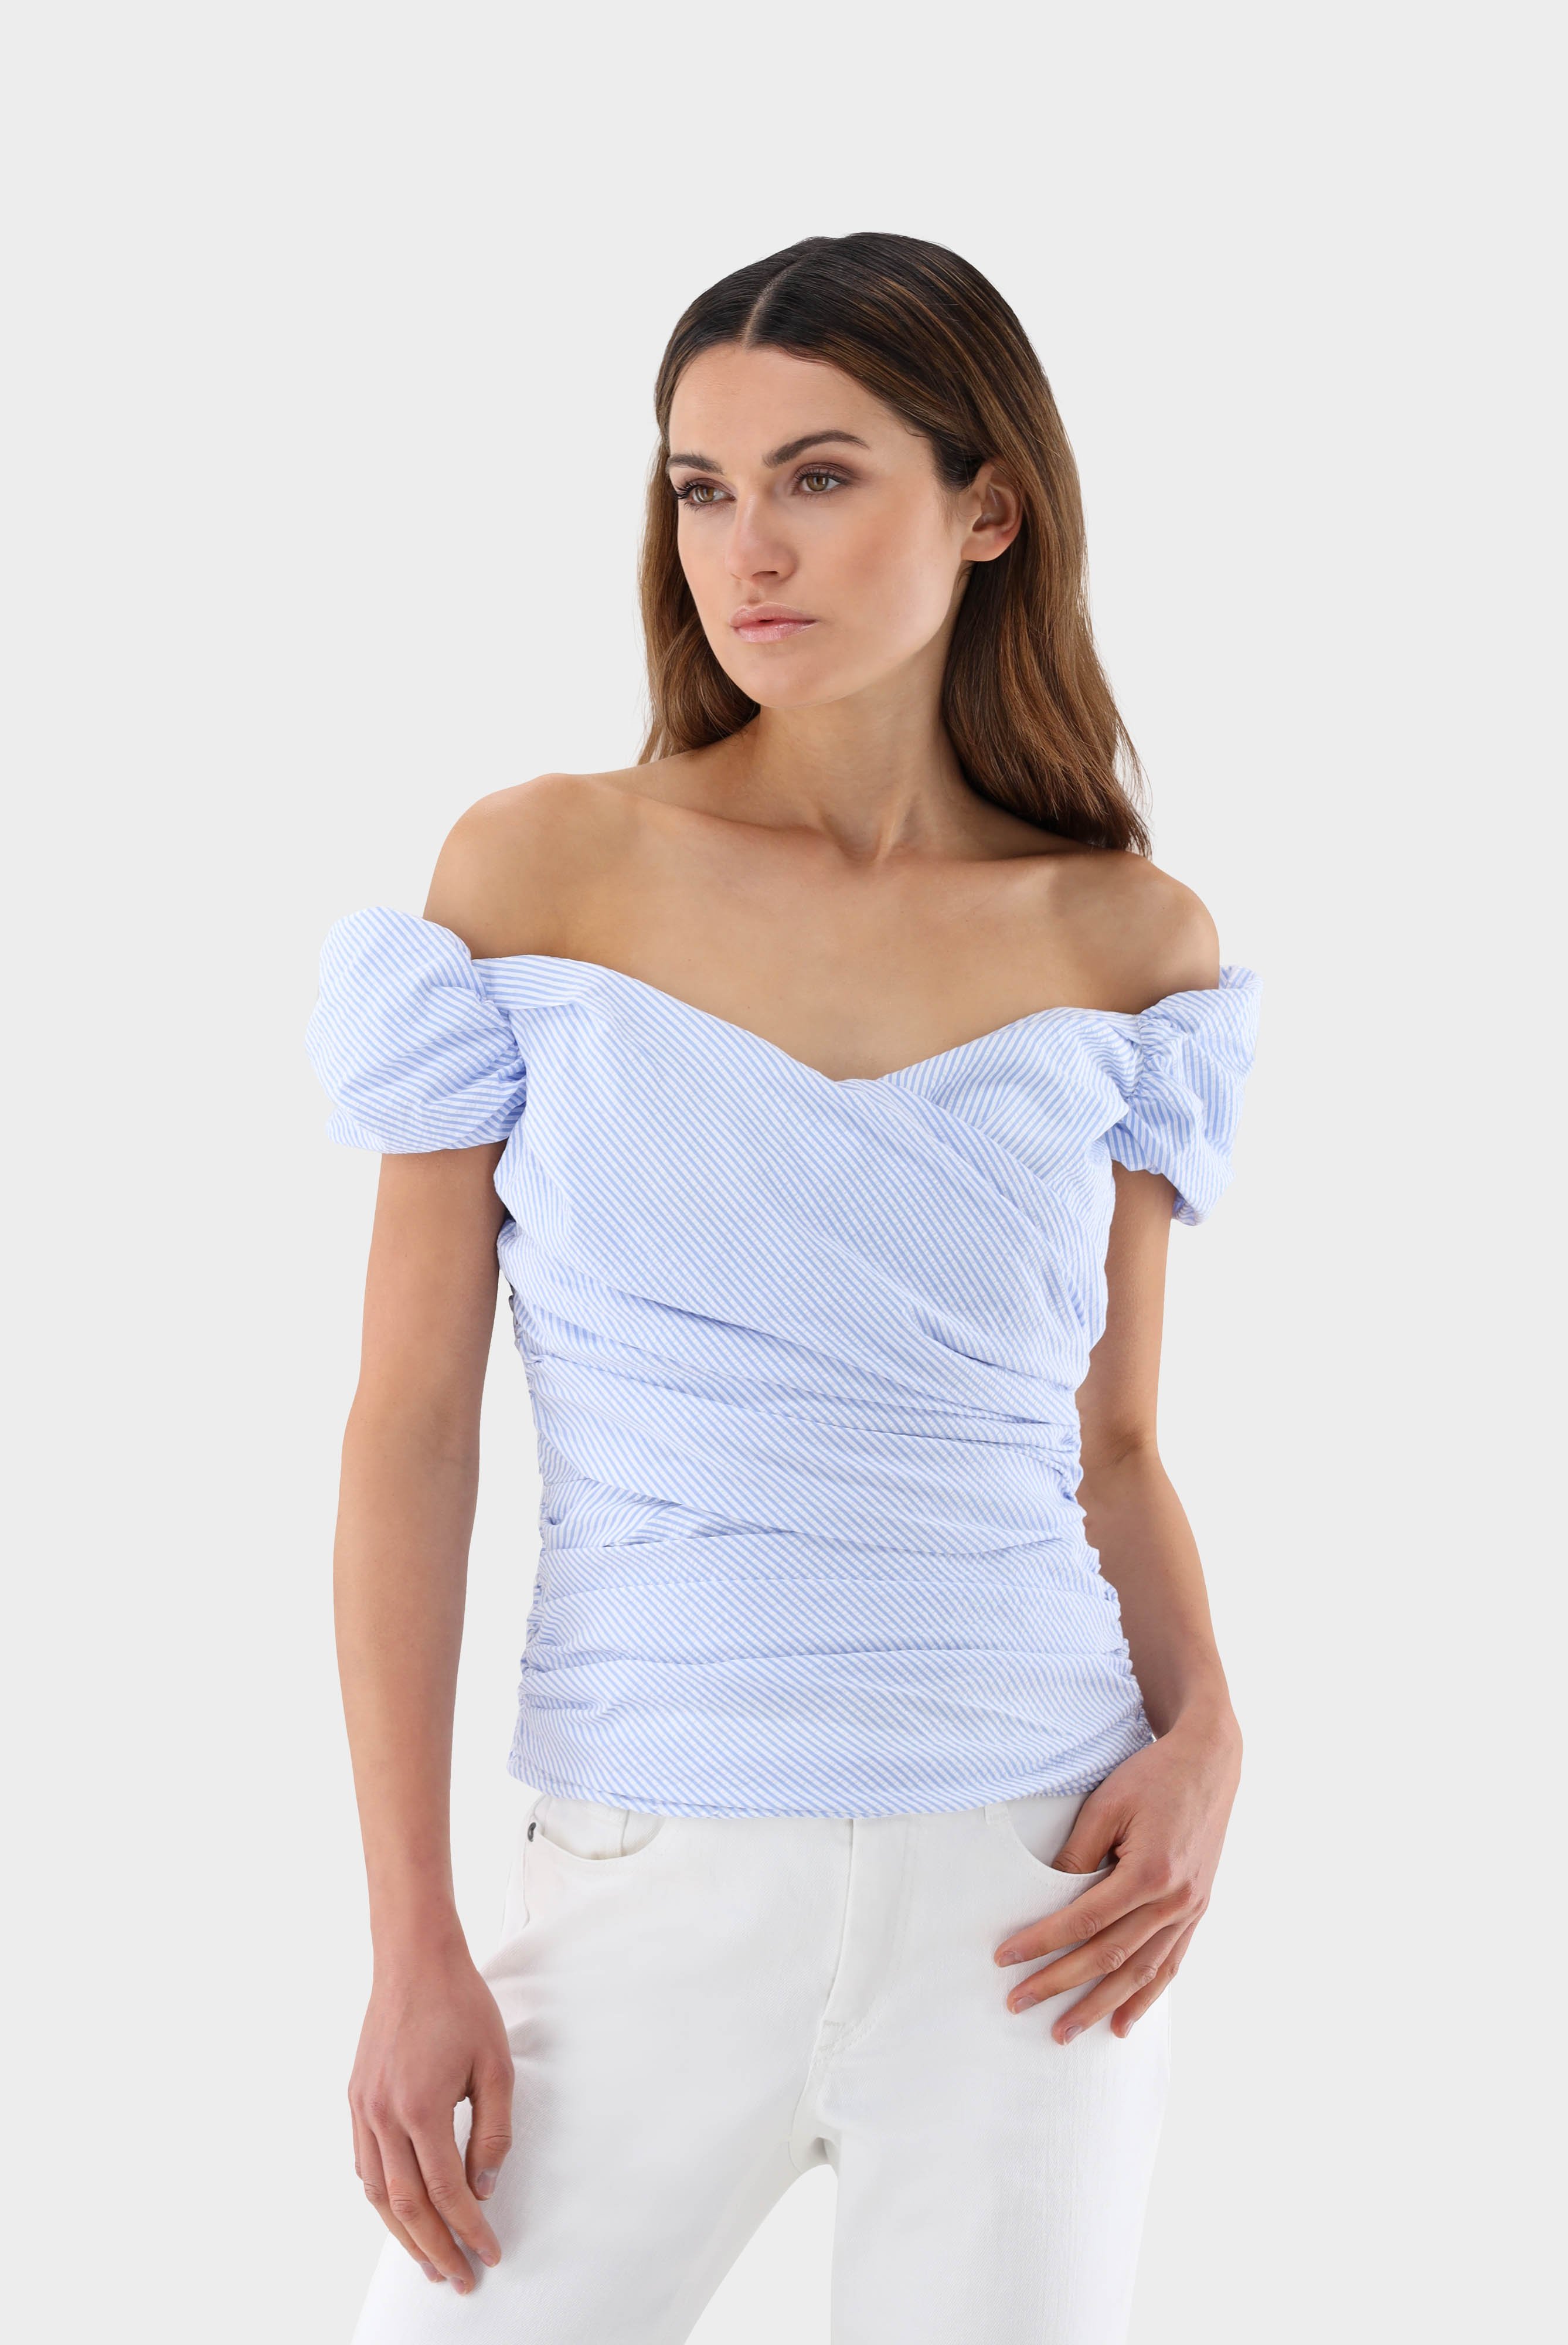 Casual Blouses+Bodice with Stripe Pattern+05.5288.18.151054.720.40